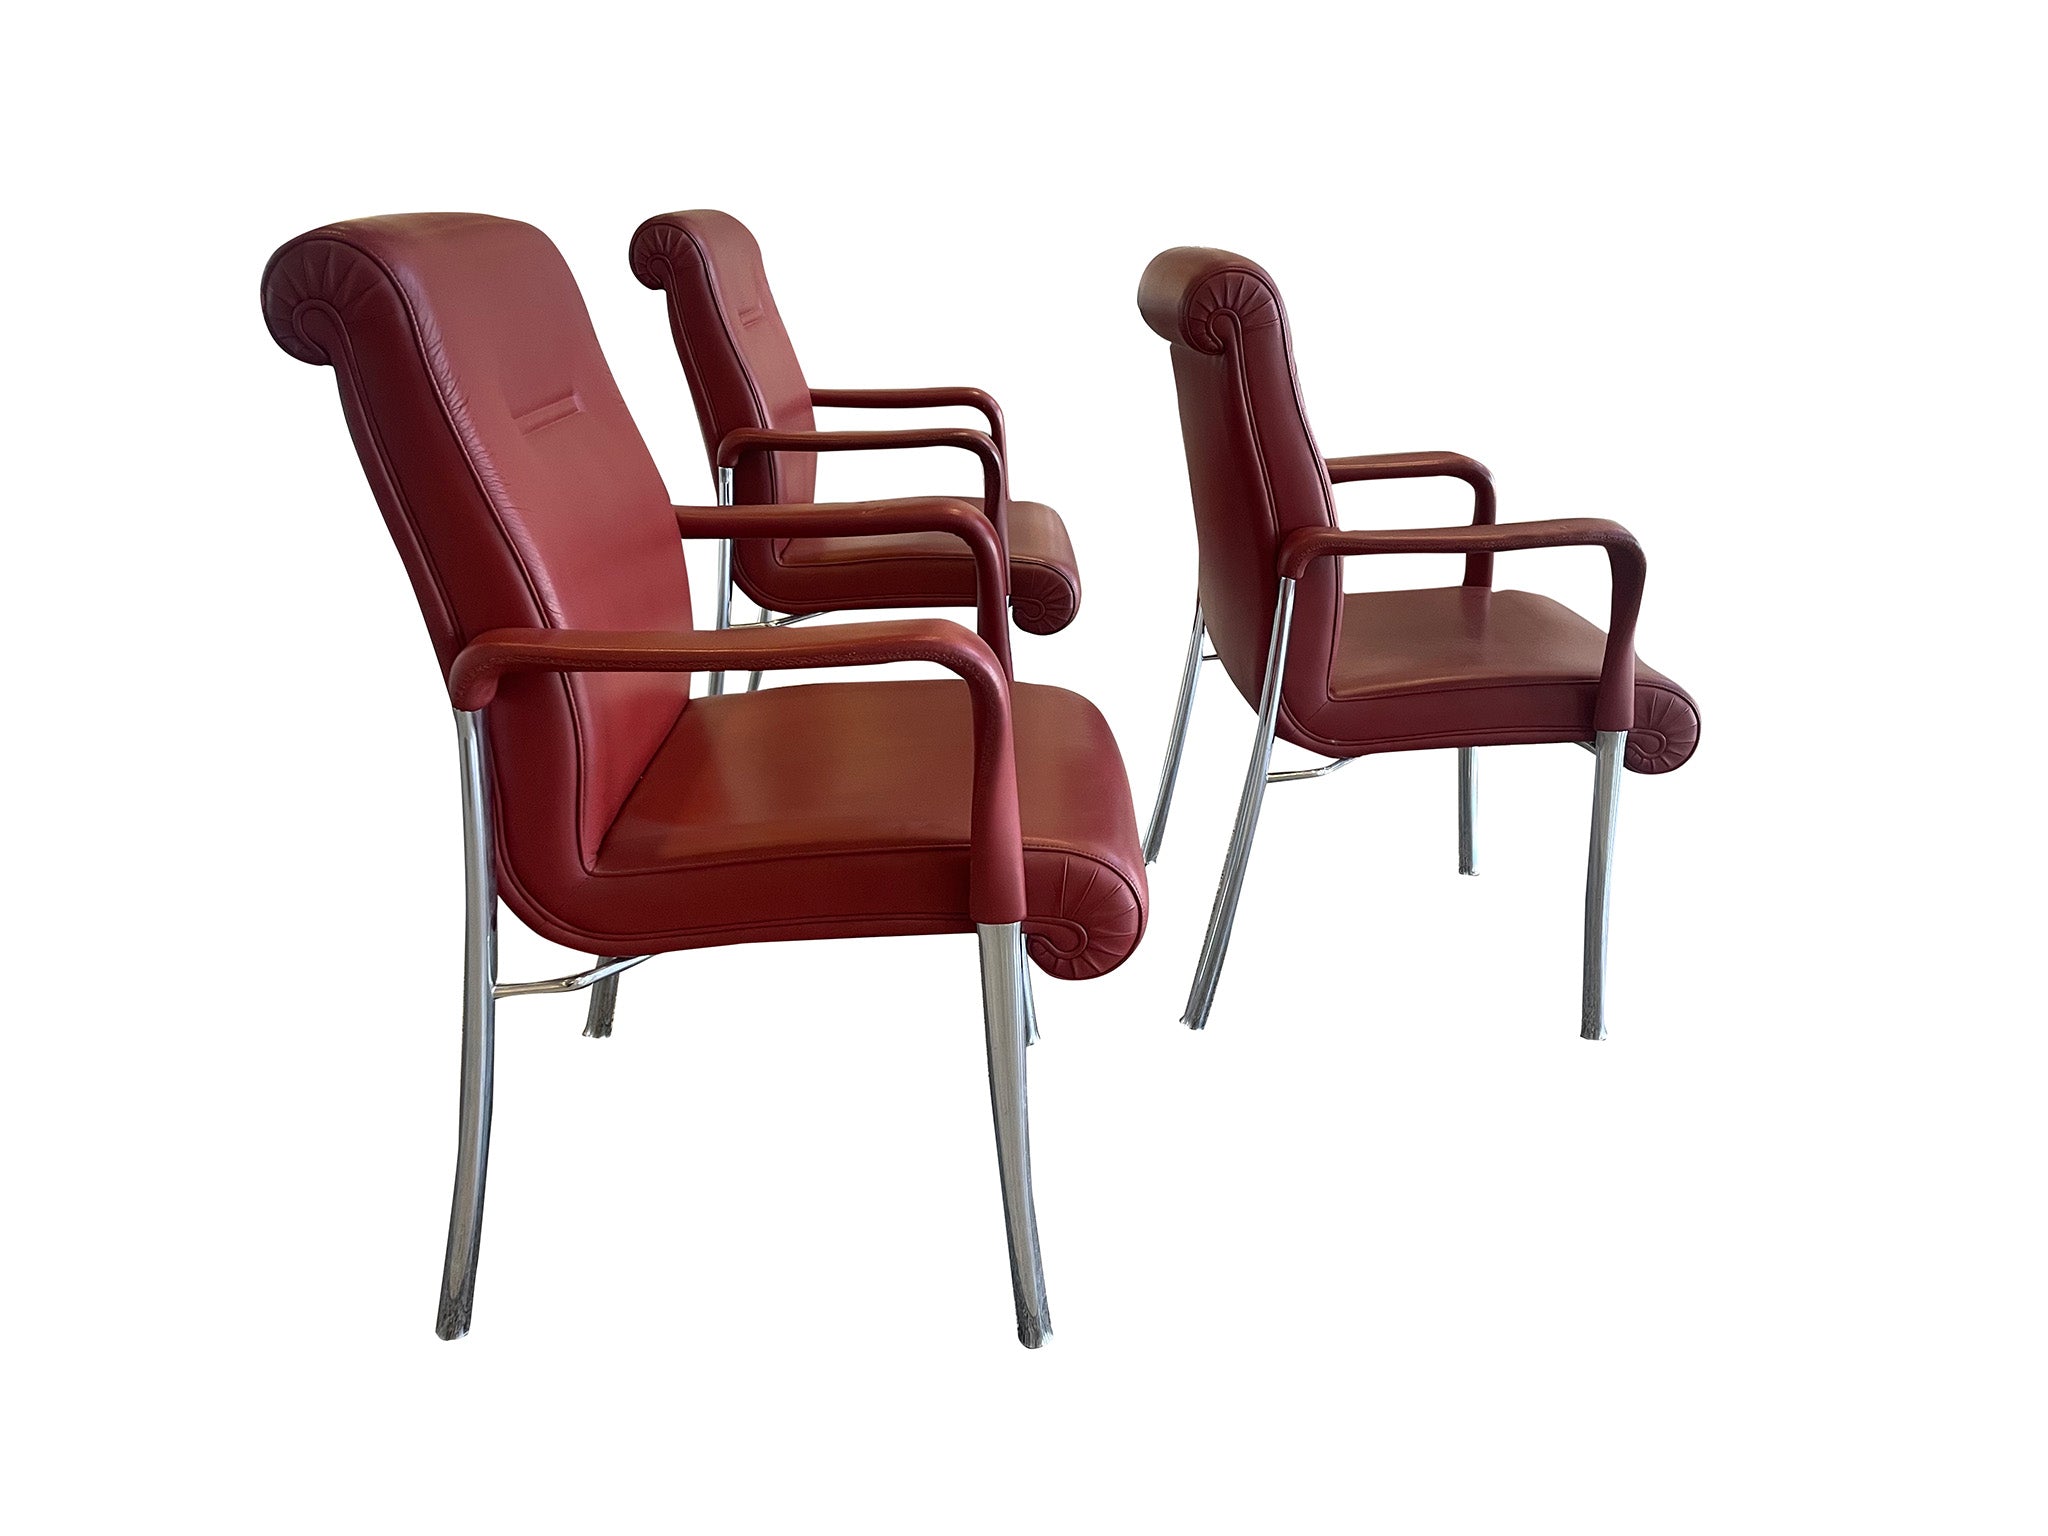 Three Oxblood Red or Office Chairs Poltrona Frau - Cafiero Select Home